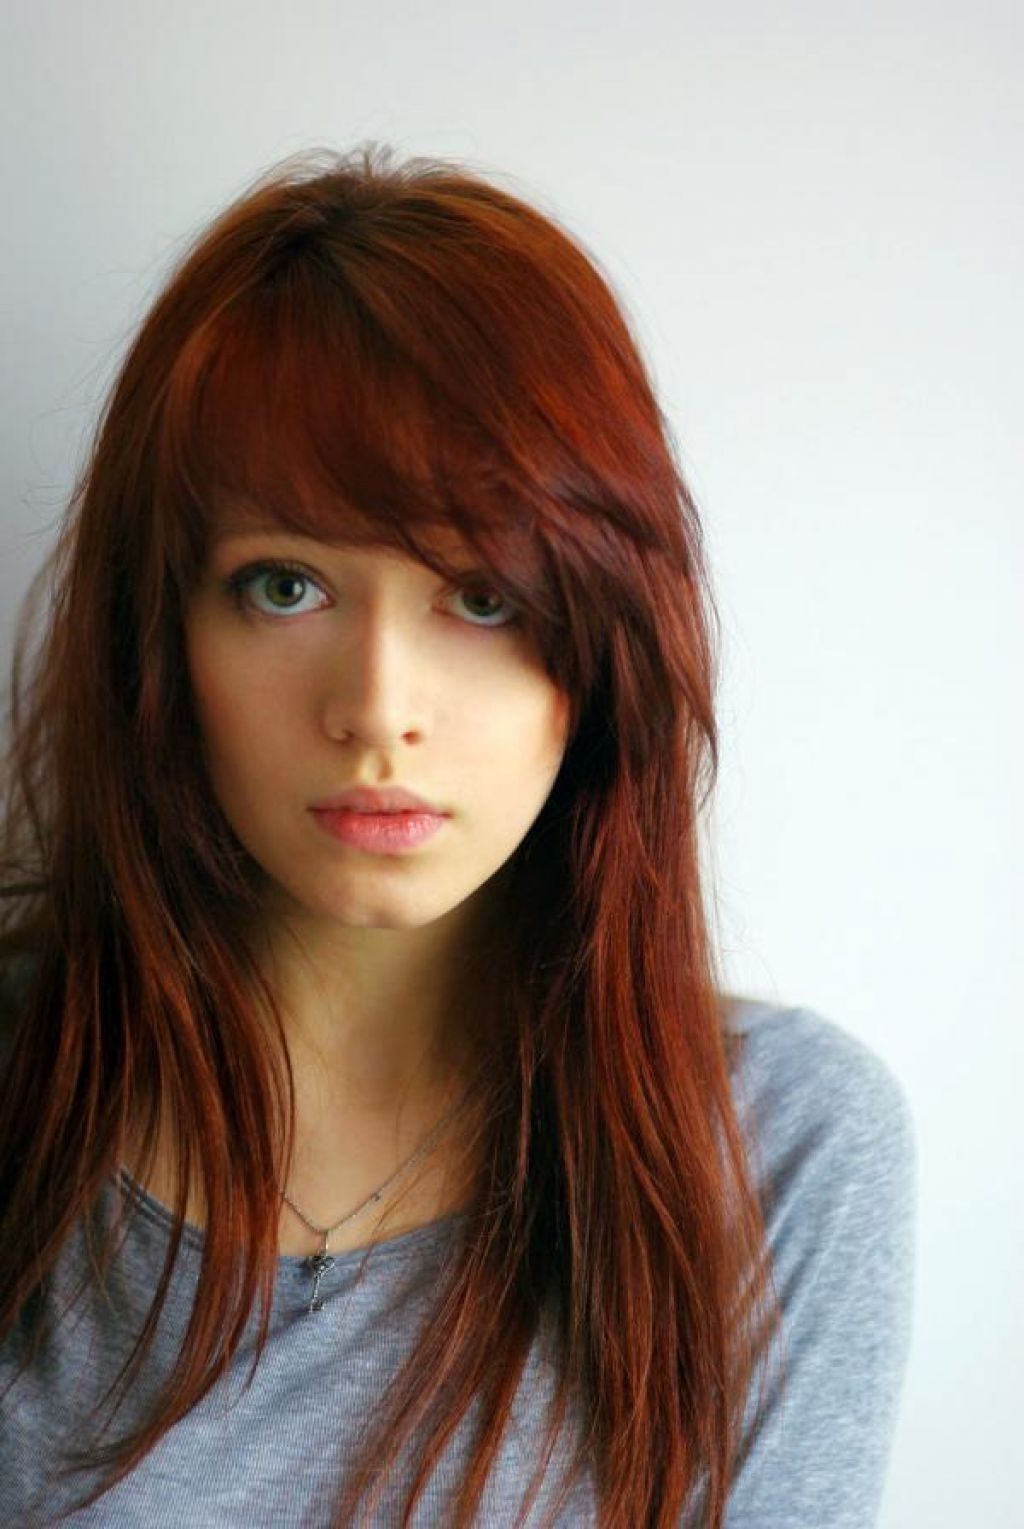 Well Known Ginger Highlights Ponytail Hairstyles With Side Bangs Pertaining To Long Hairstyles With Side Bangs Red Hair (Gallery 9 of 20)